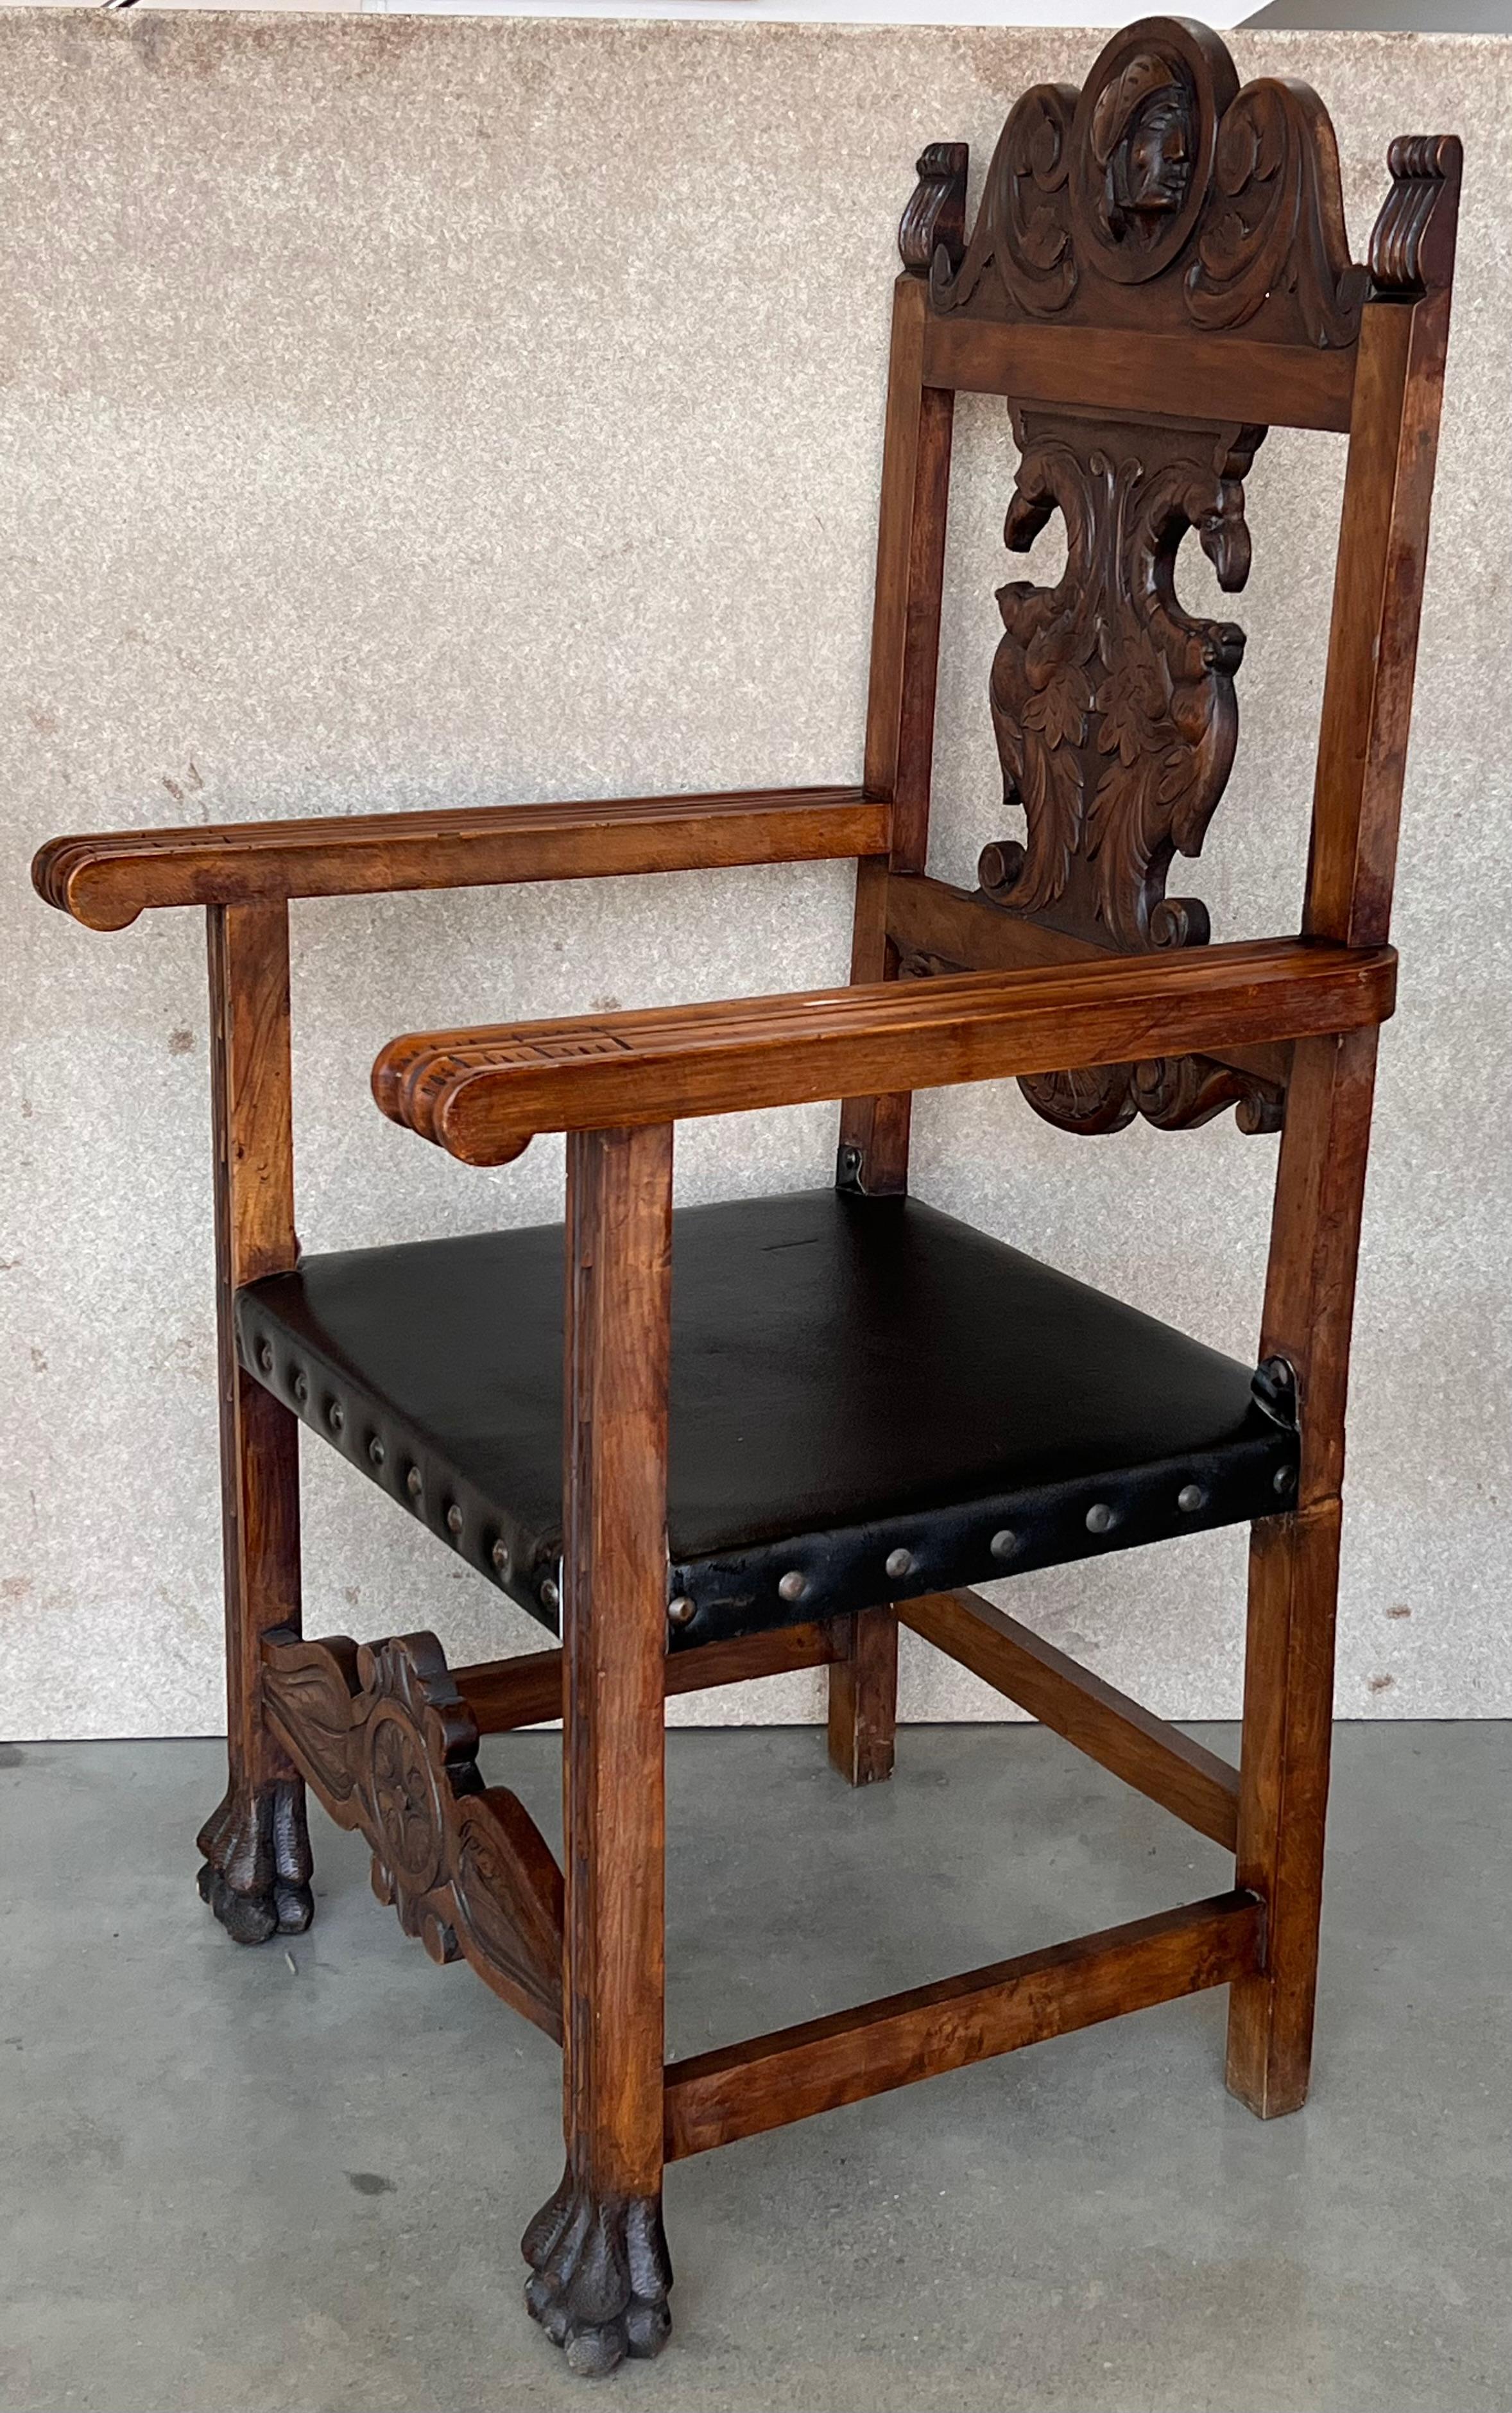 Renaissance 19th Century French Carved Walnut Turned Wood Armchair with Claw Feet For Sale